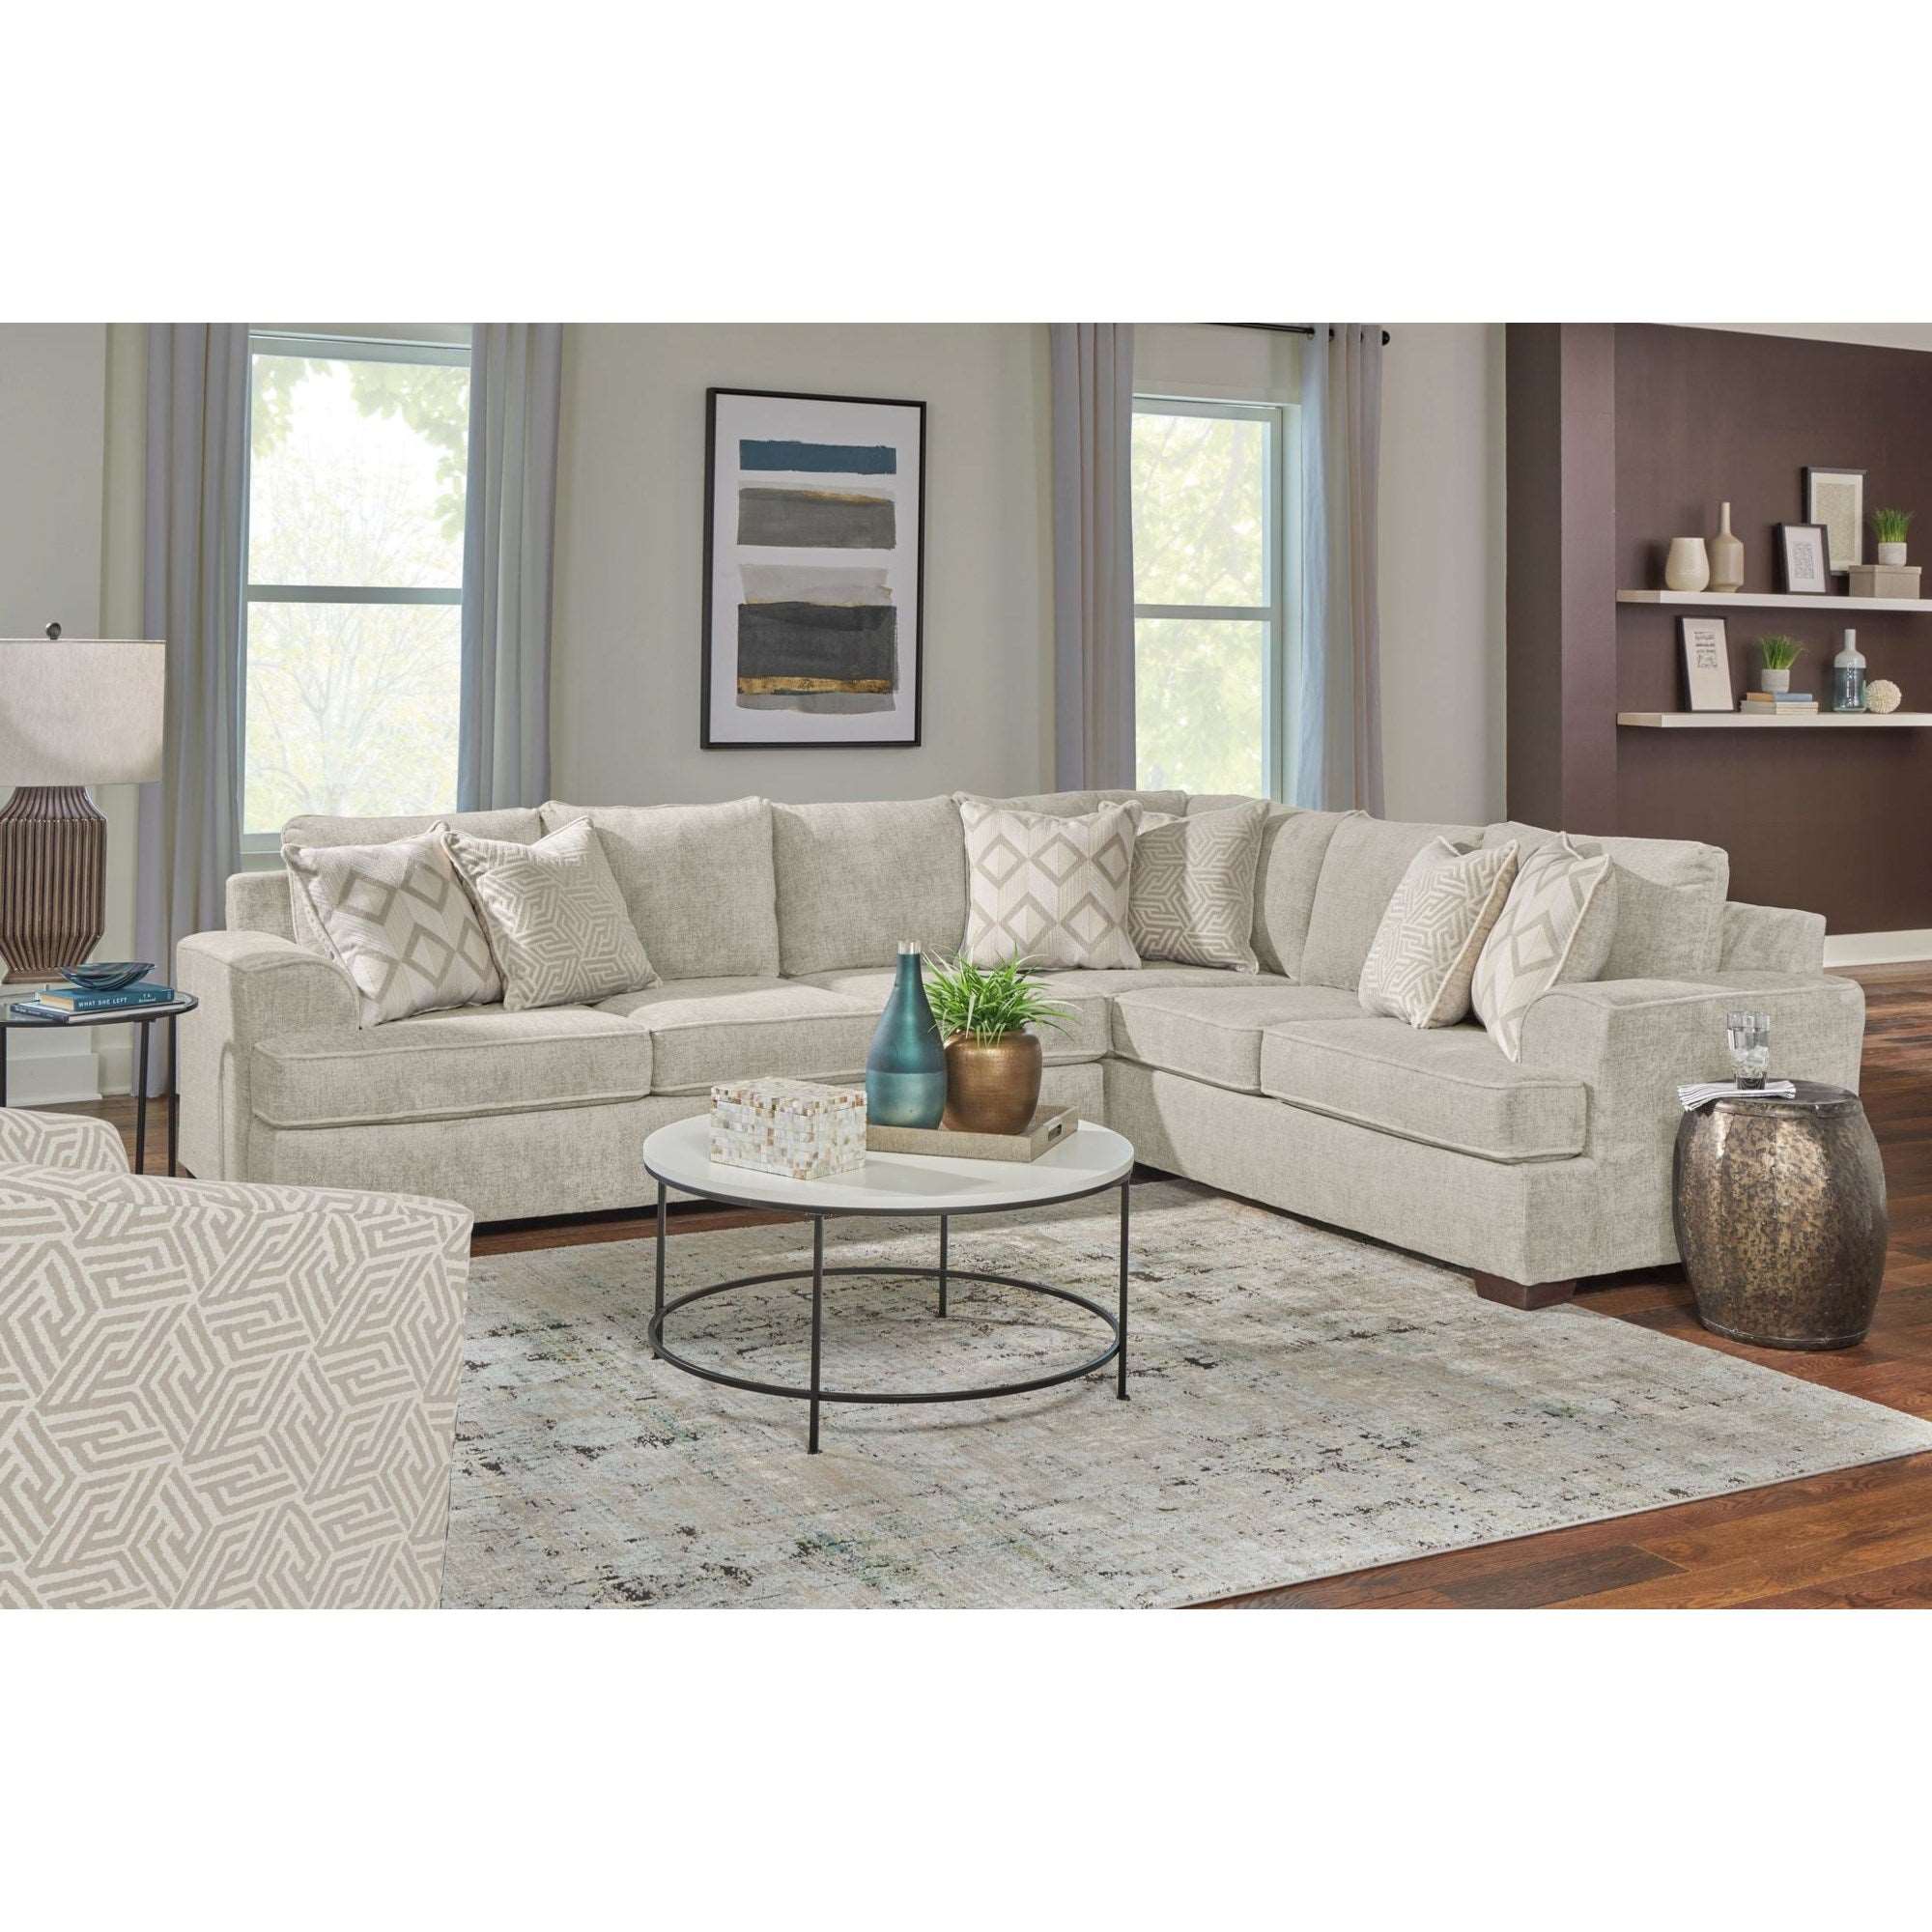 2 PIECE SECTIONAL - RITZY NATURAL